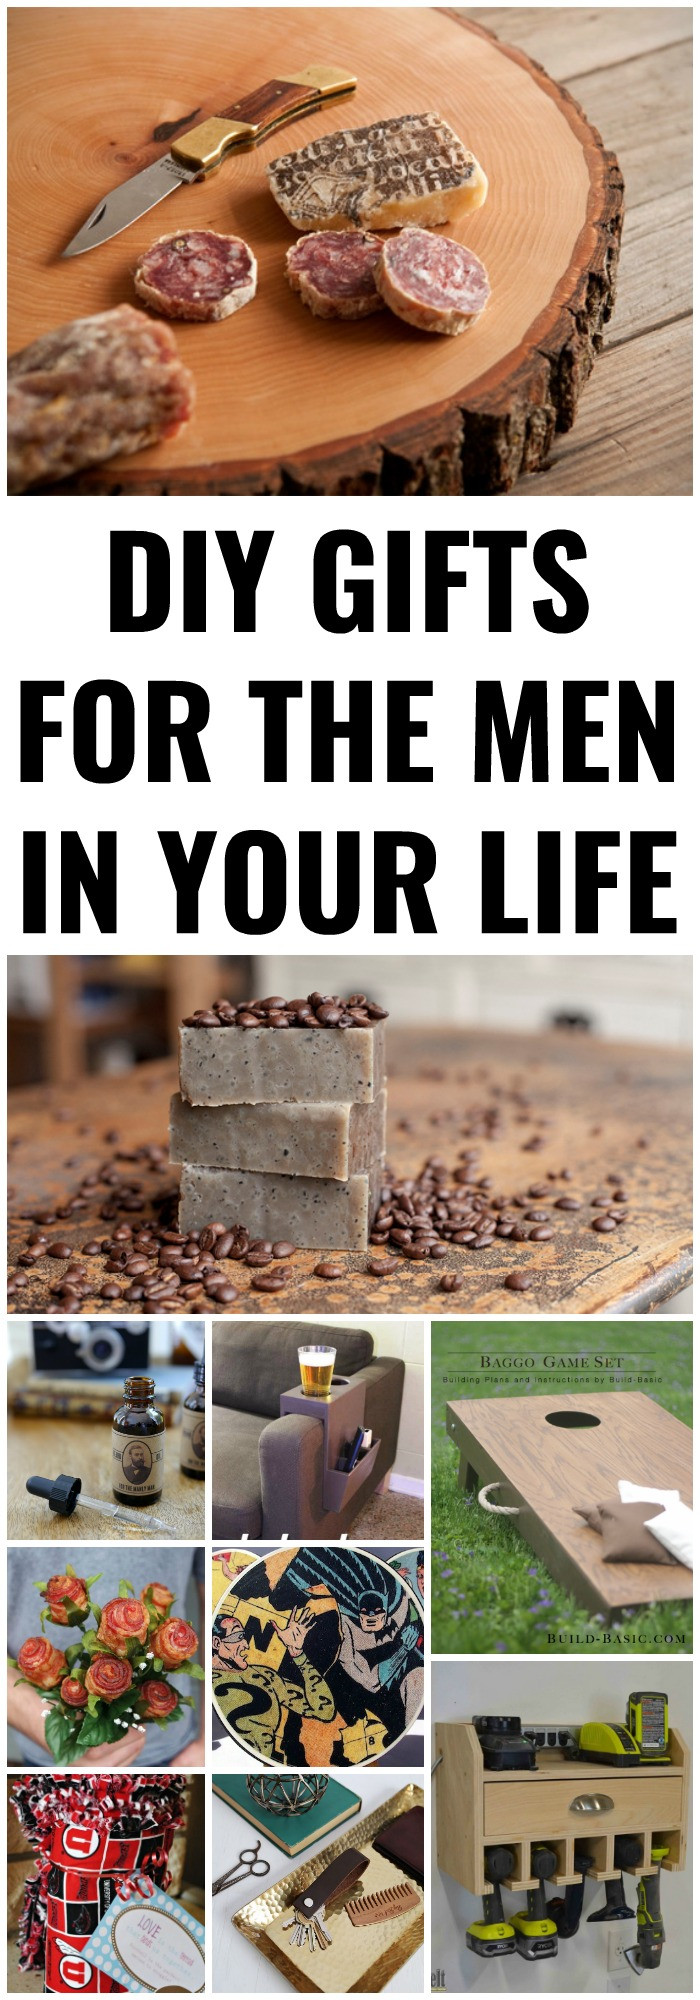 Gifts For Men DIY
 35 DIY Gifts for the Men in Your Life Sarah Blooms